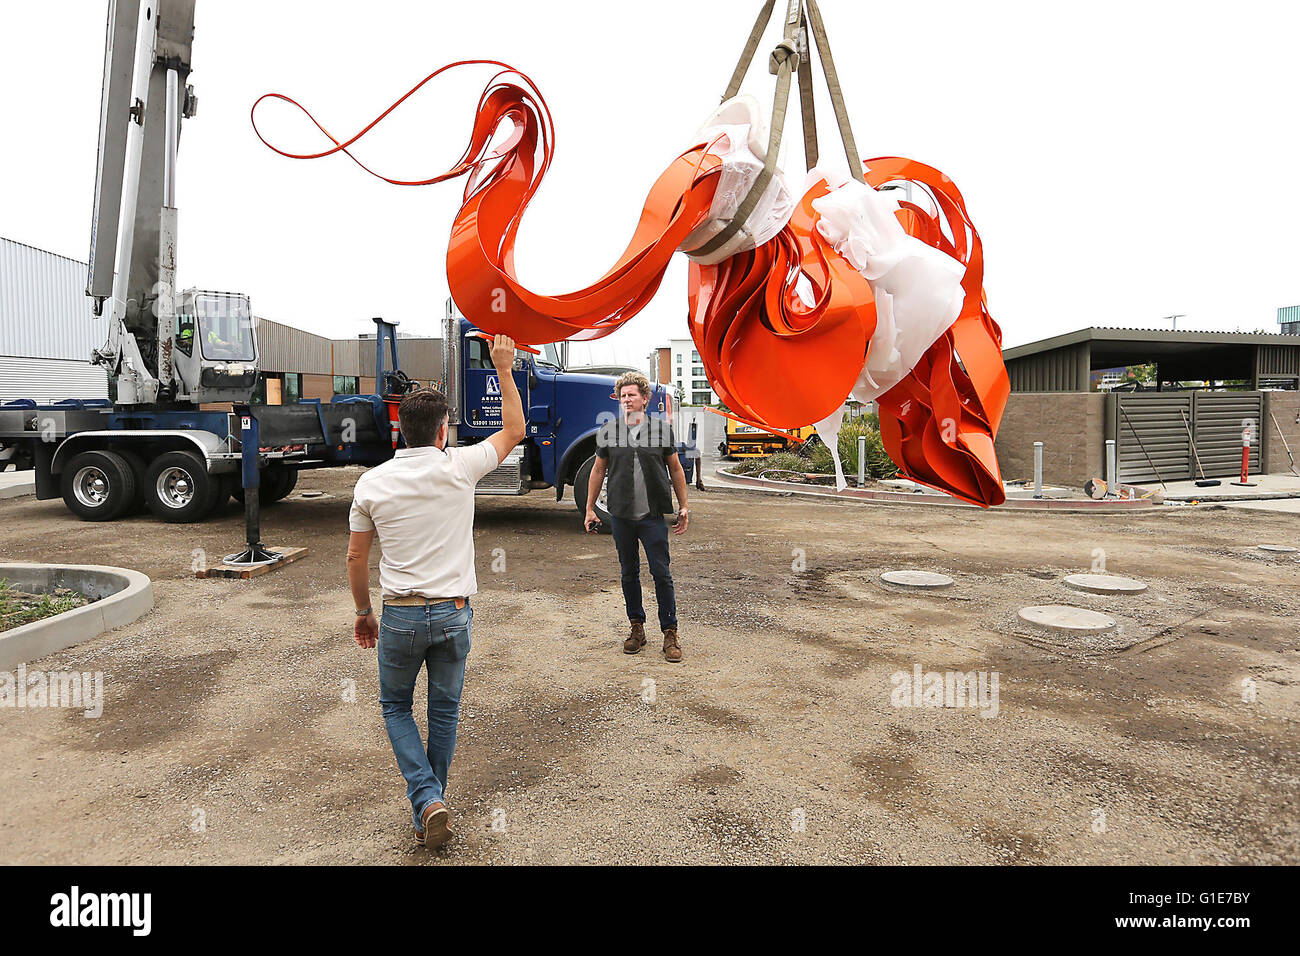 Napa, CA, USA. 11th May, 2016. Phoenix-based artist Pete Deise, right, watches as Andy Byrnes steadies his sculpture before installation at South Napa Century Center on Wednesday morning. The sculpture weighs about 3,500 pounds is 14 feet long by 6 feet high and 28 inches wide. Byrnes is the architect and builder of the center. © Napa Valley Register/ZUMA Wire/Alamy Live News Stock Photo